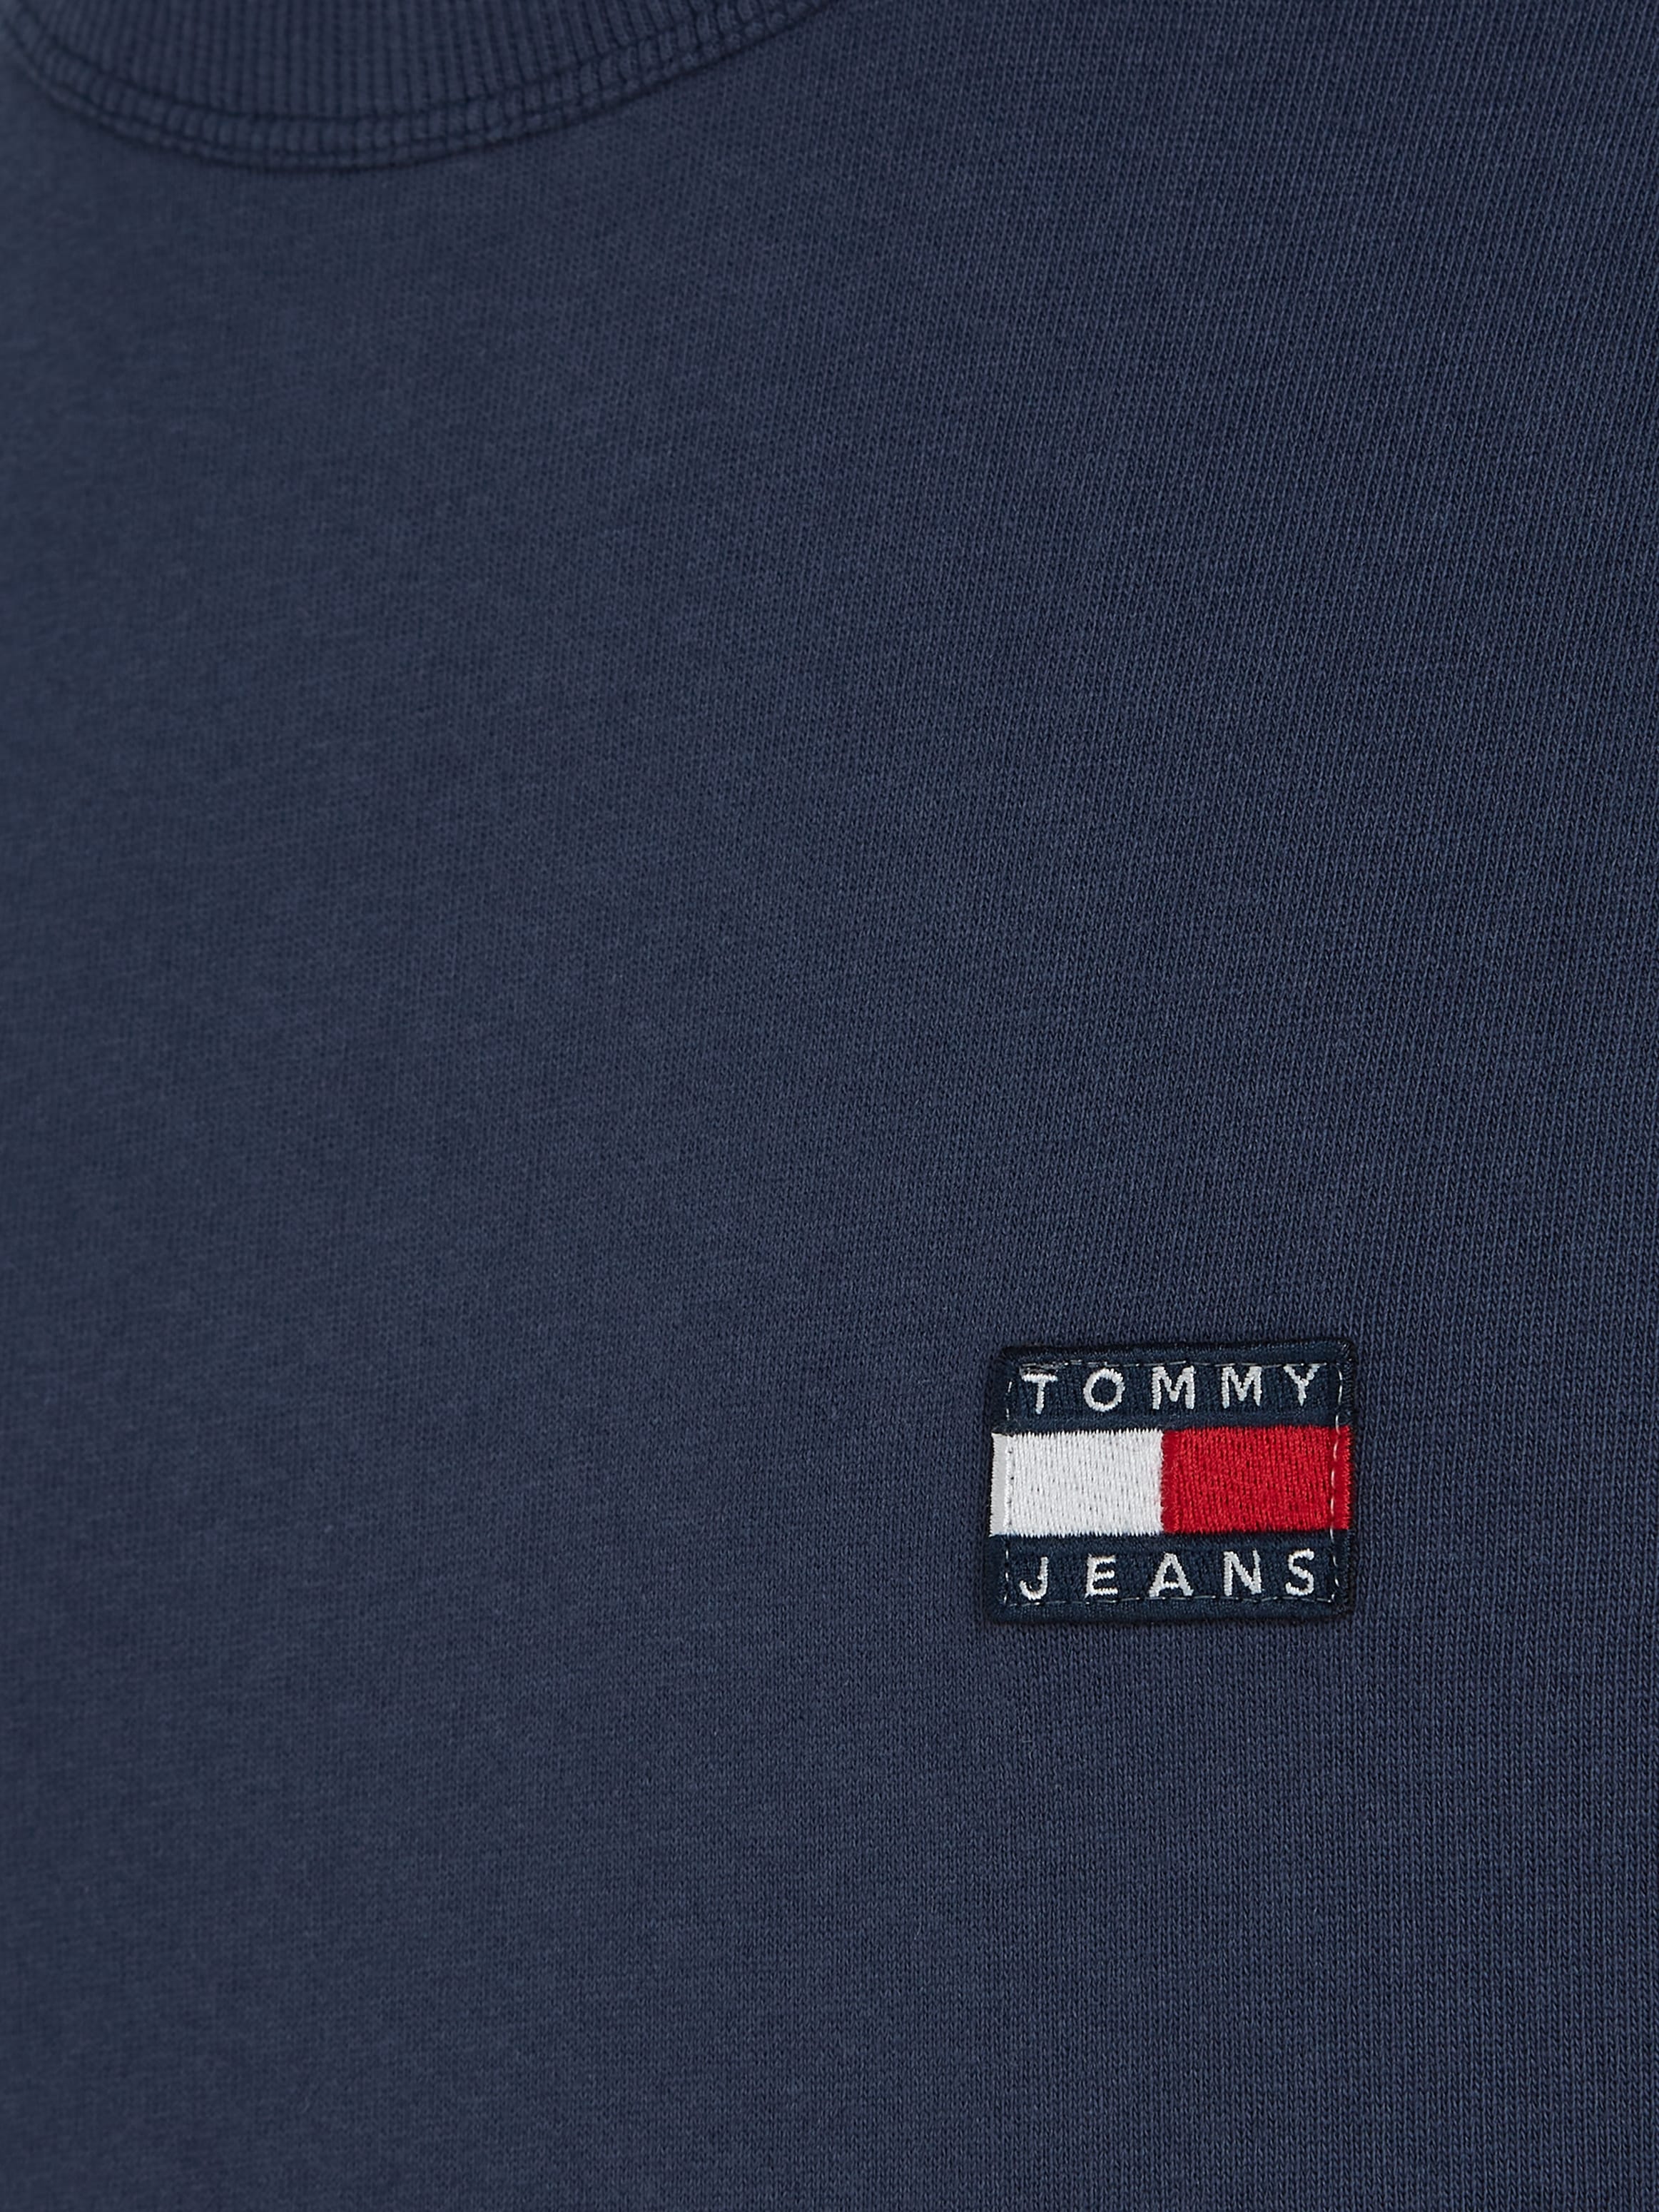 T-Shirt shoppen BADGE TEE« OTTO Tommy online »TJM bei TOMMY XS Jeans CLSC